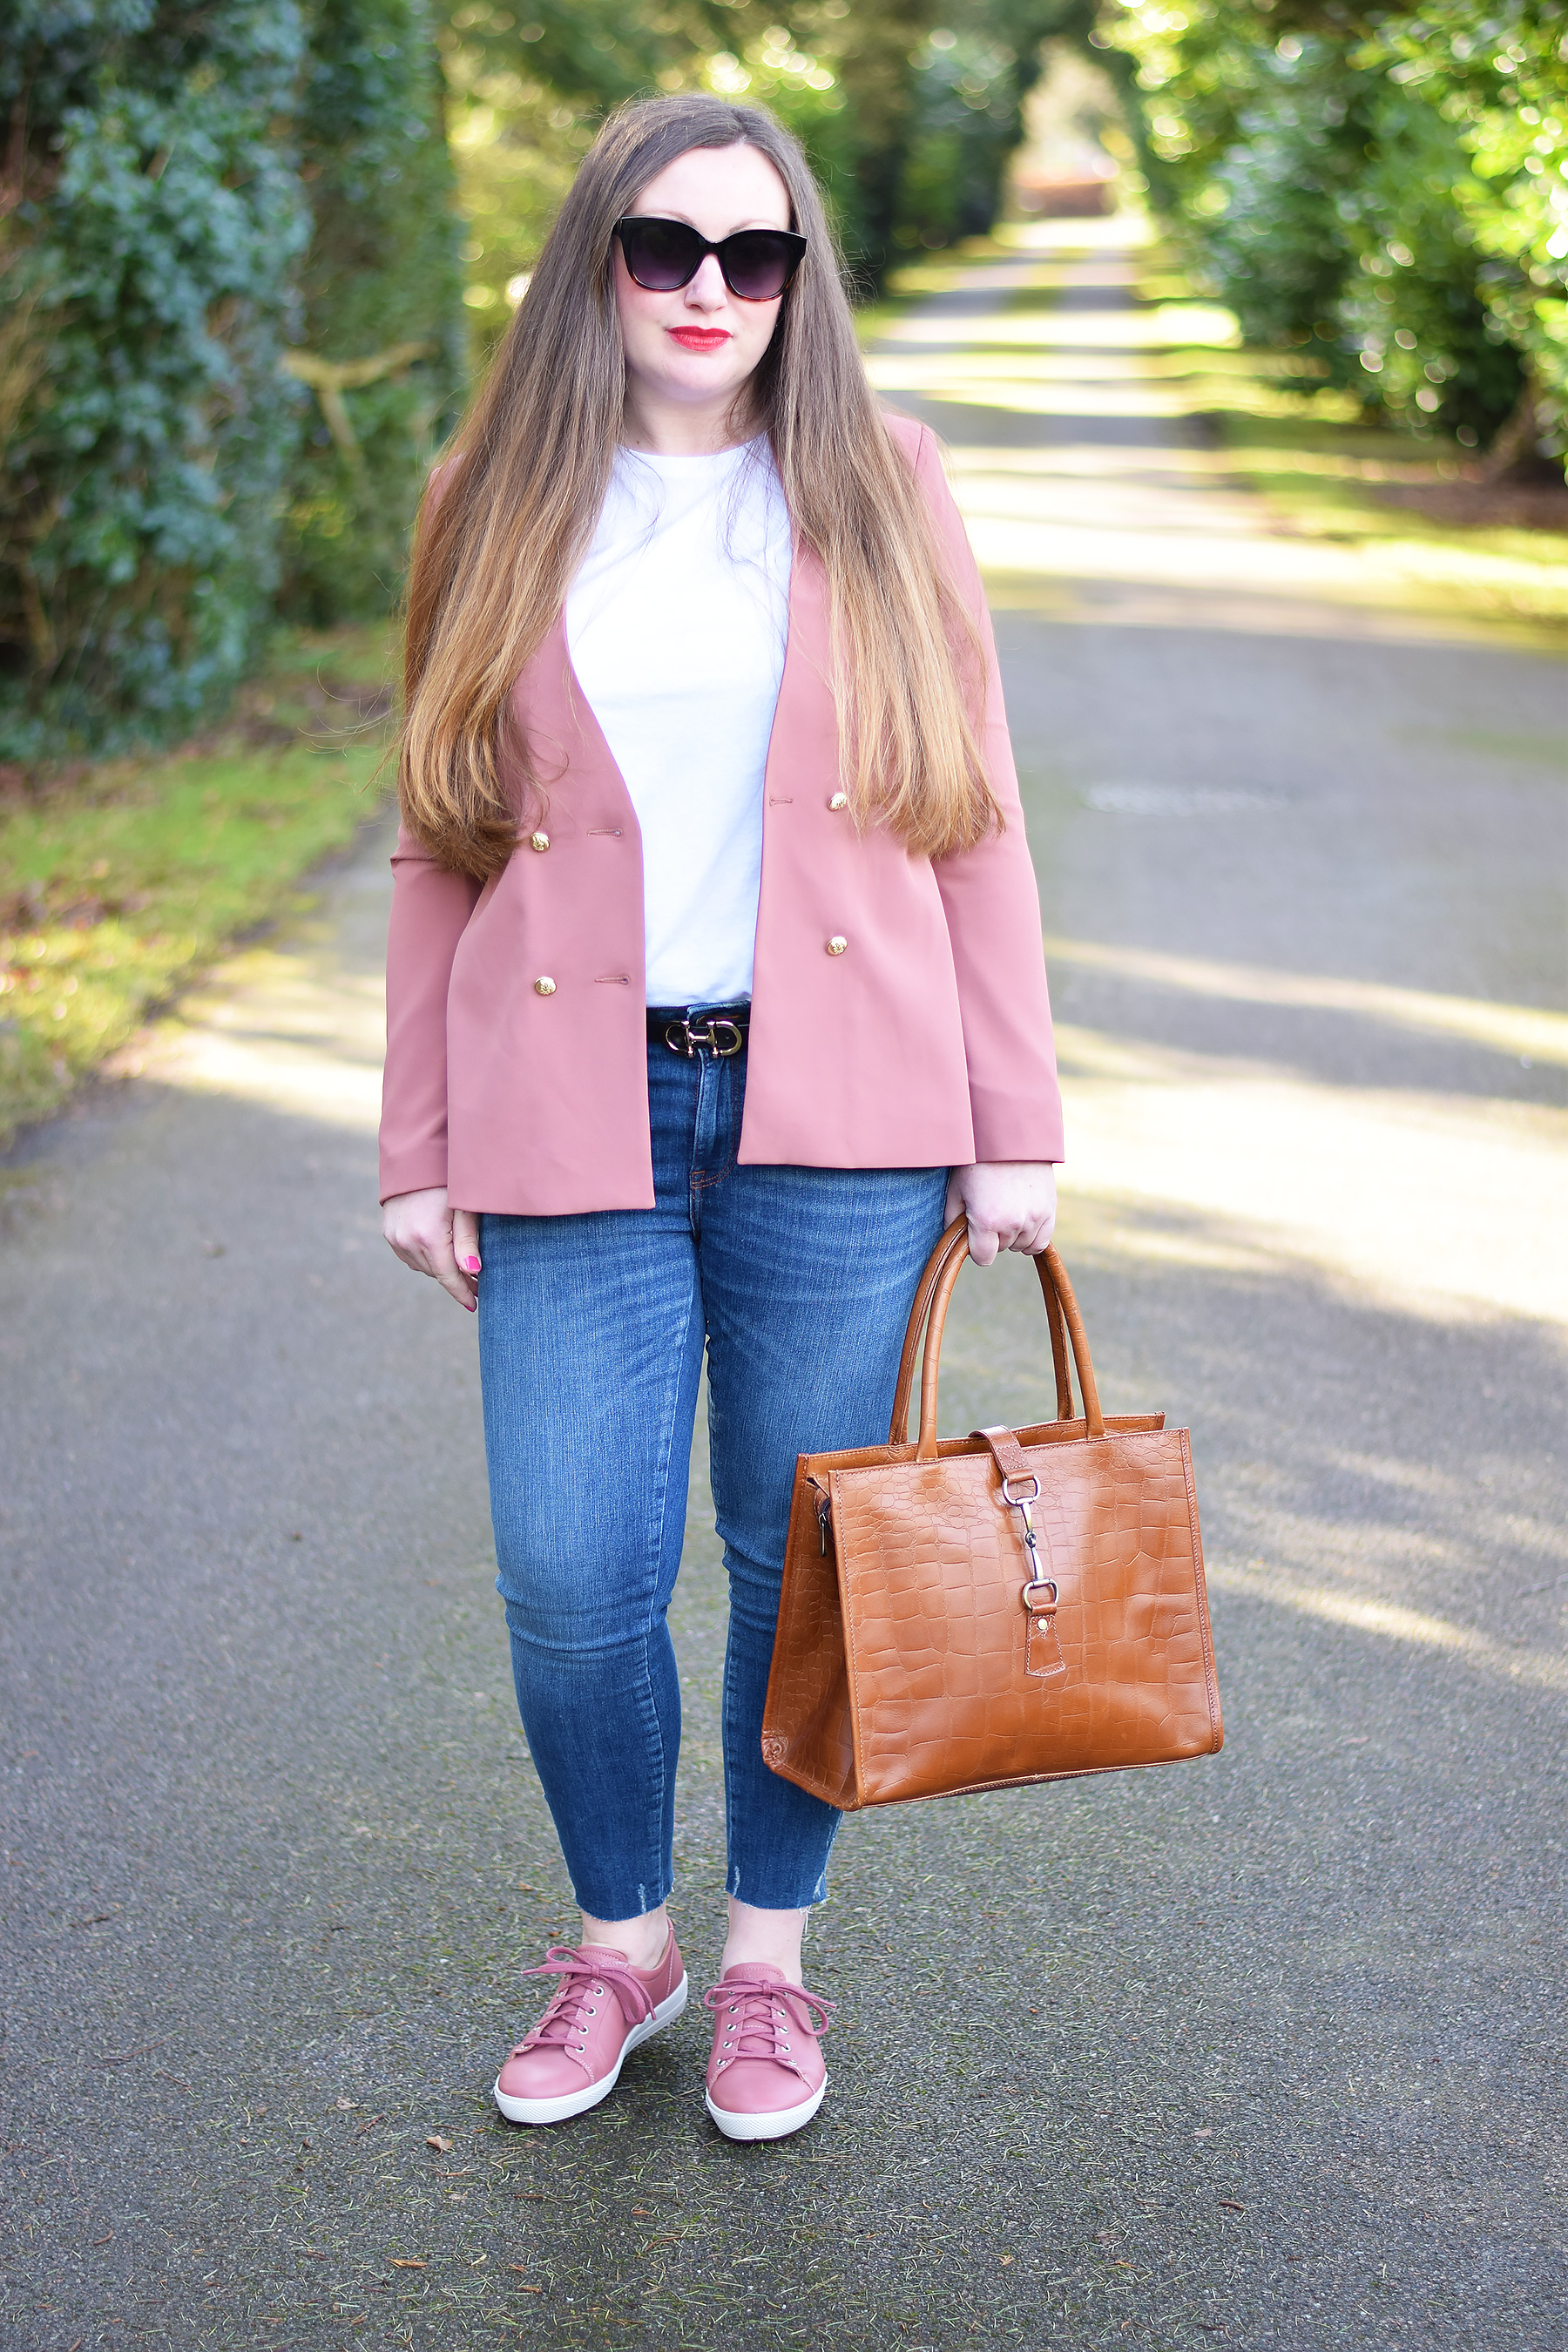 Salmon pink blazer with co ordinating accessories